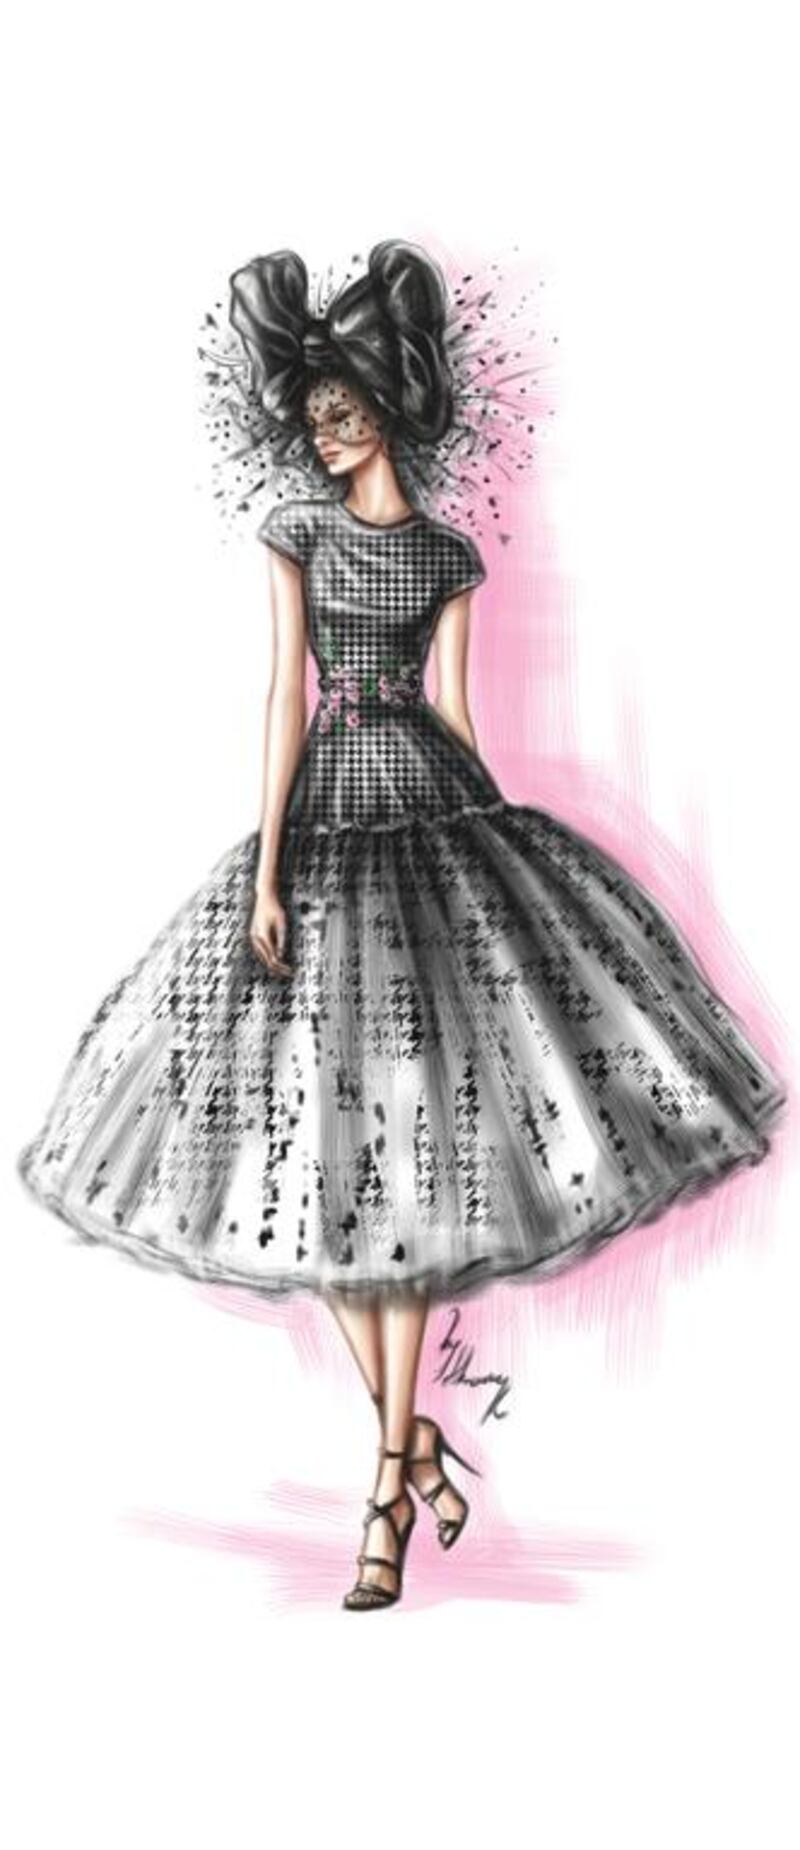 A look inspired by Giambattista Valli's spring/summer couture. Illustration by Shamekh Ibrahim AlBluwi